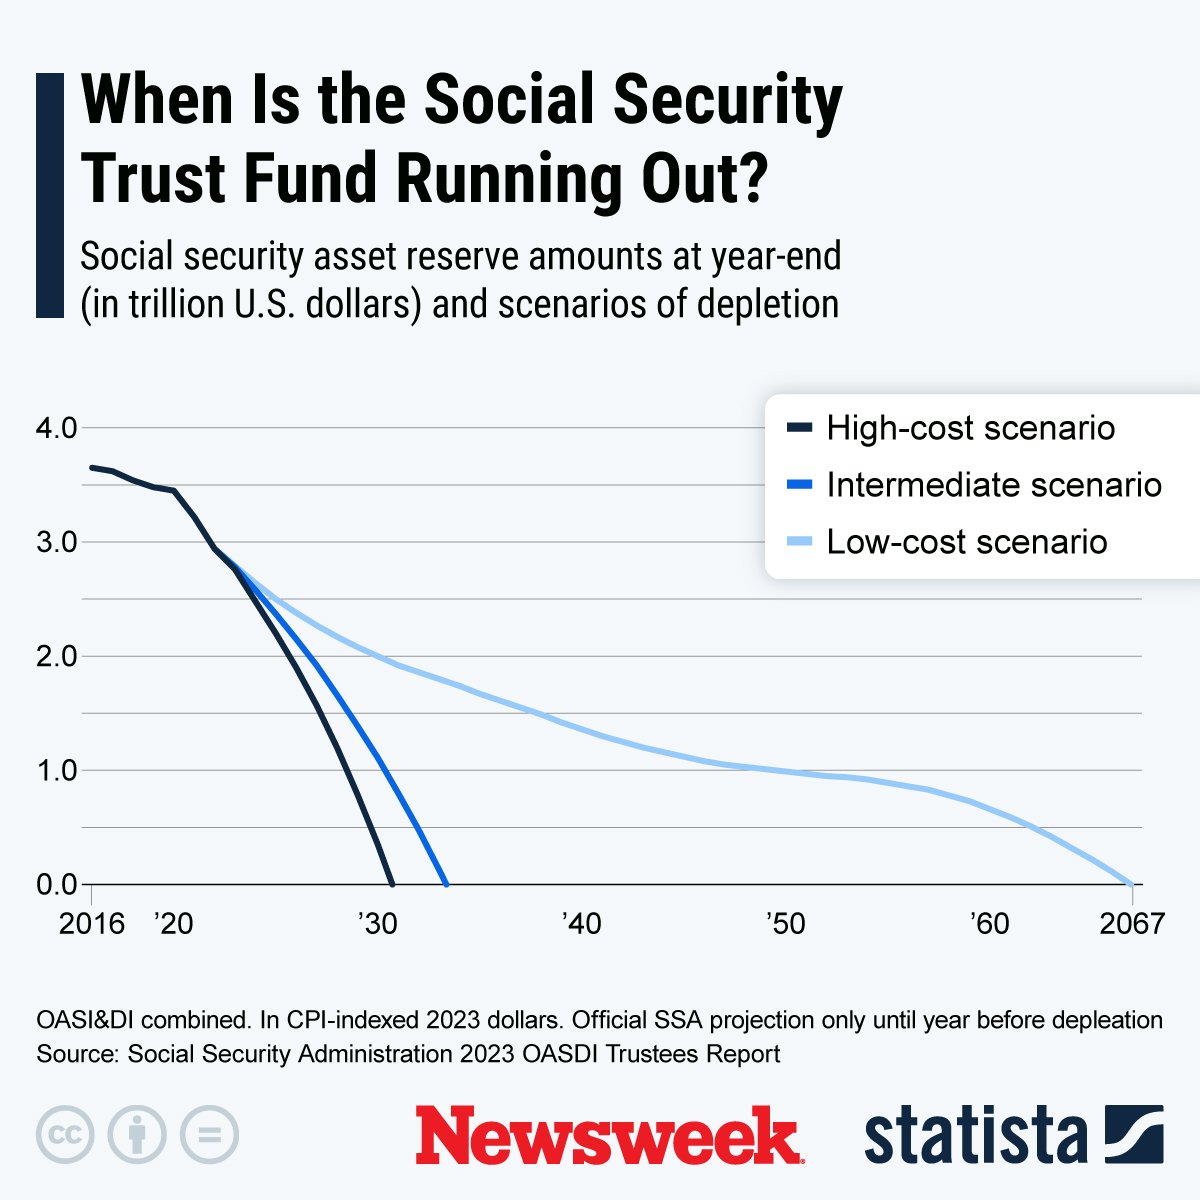 Social Security Trust Fund Running Out